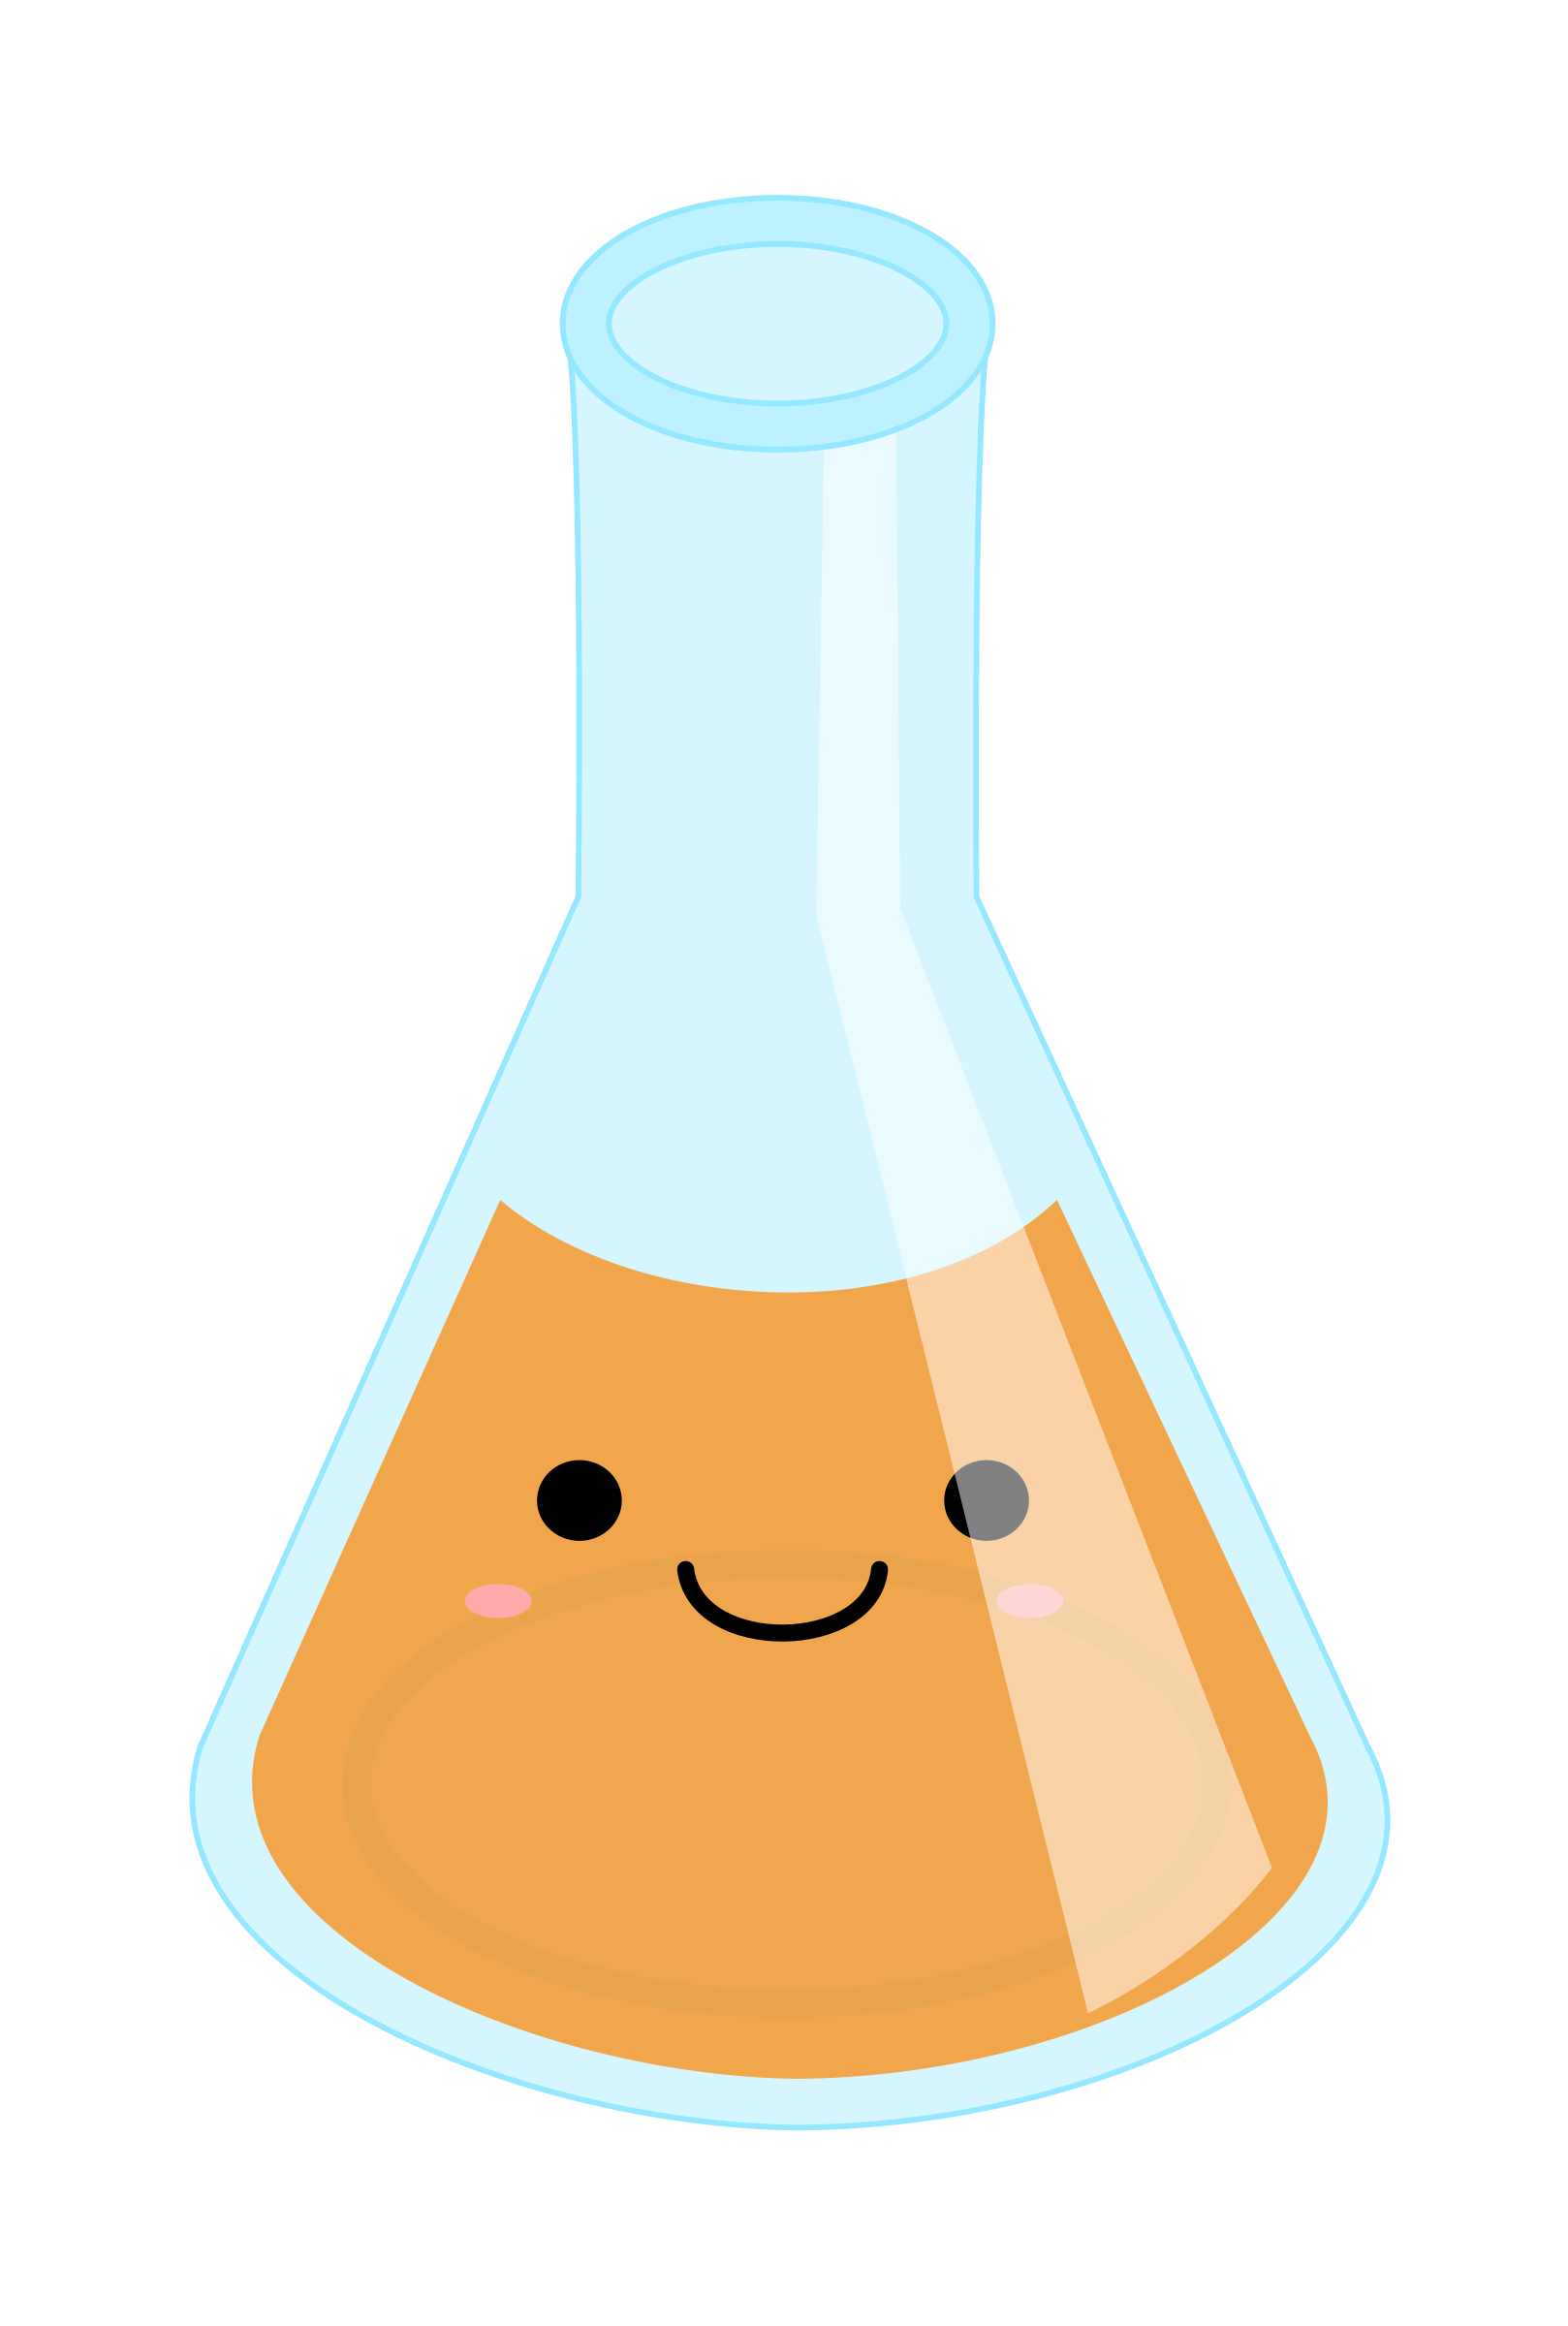 Kawaii clipart airplane. Full erlenmeyer flask by